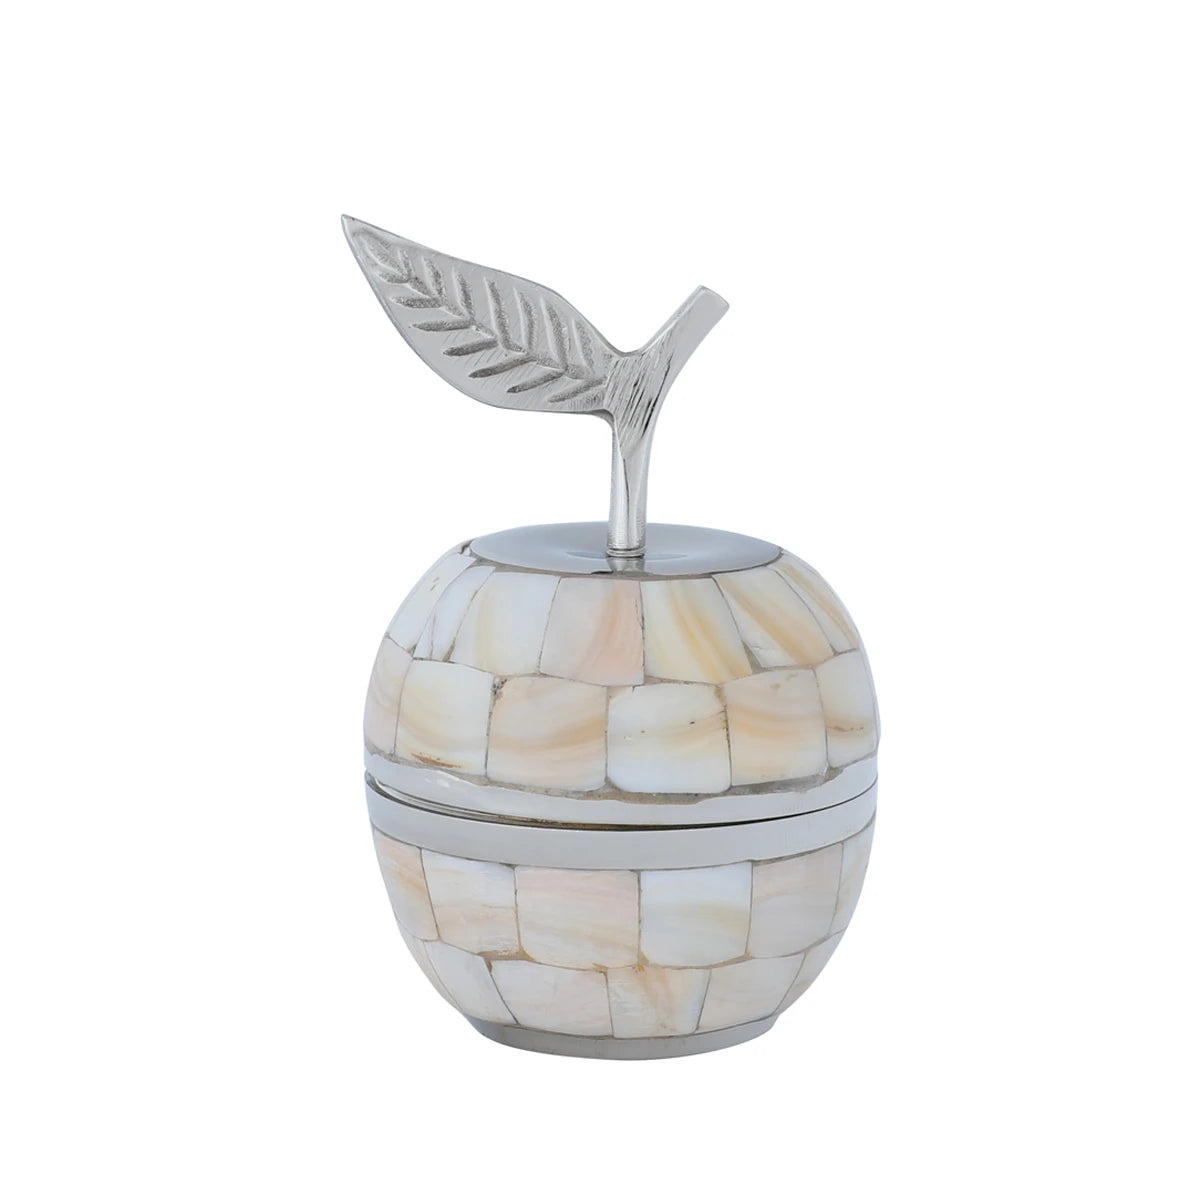 Apple Shaped Luxurious Trinket Box Handmade from Nickel with Square Mother of Pearl Inlays